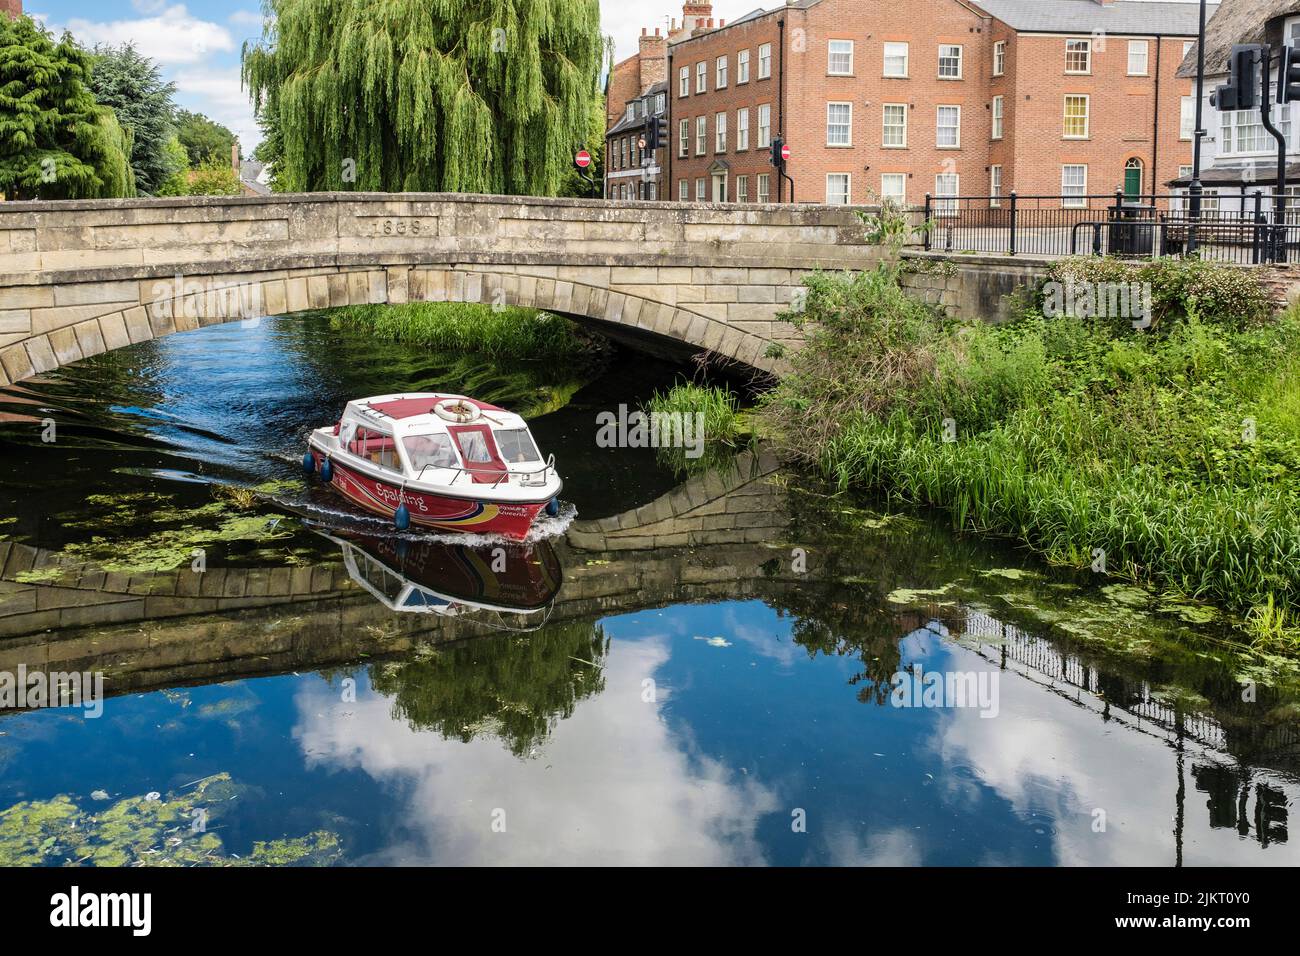 A water taxi going under the old bridge over the River Welland. Spalding, Lincolnshire, England, UK, Britain Stock Photo